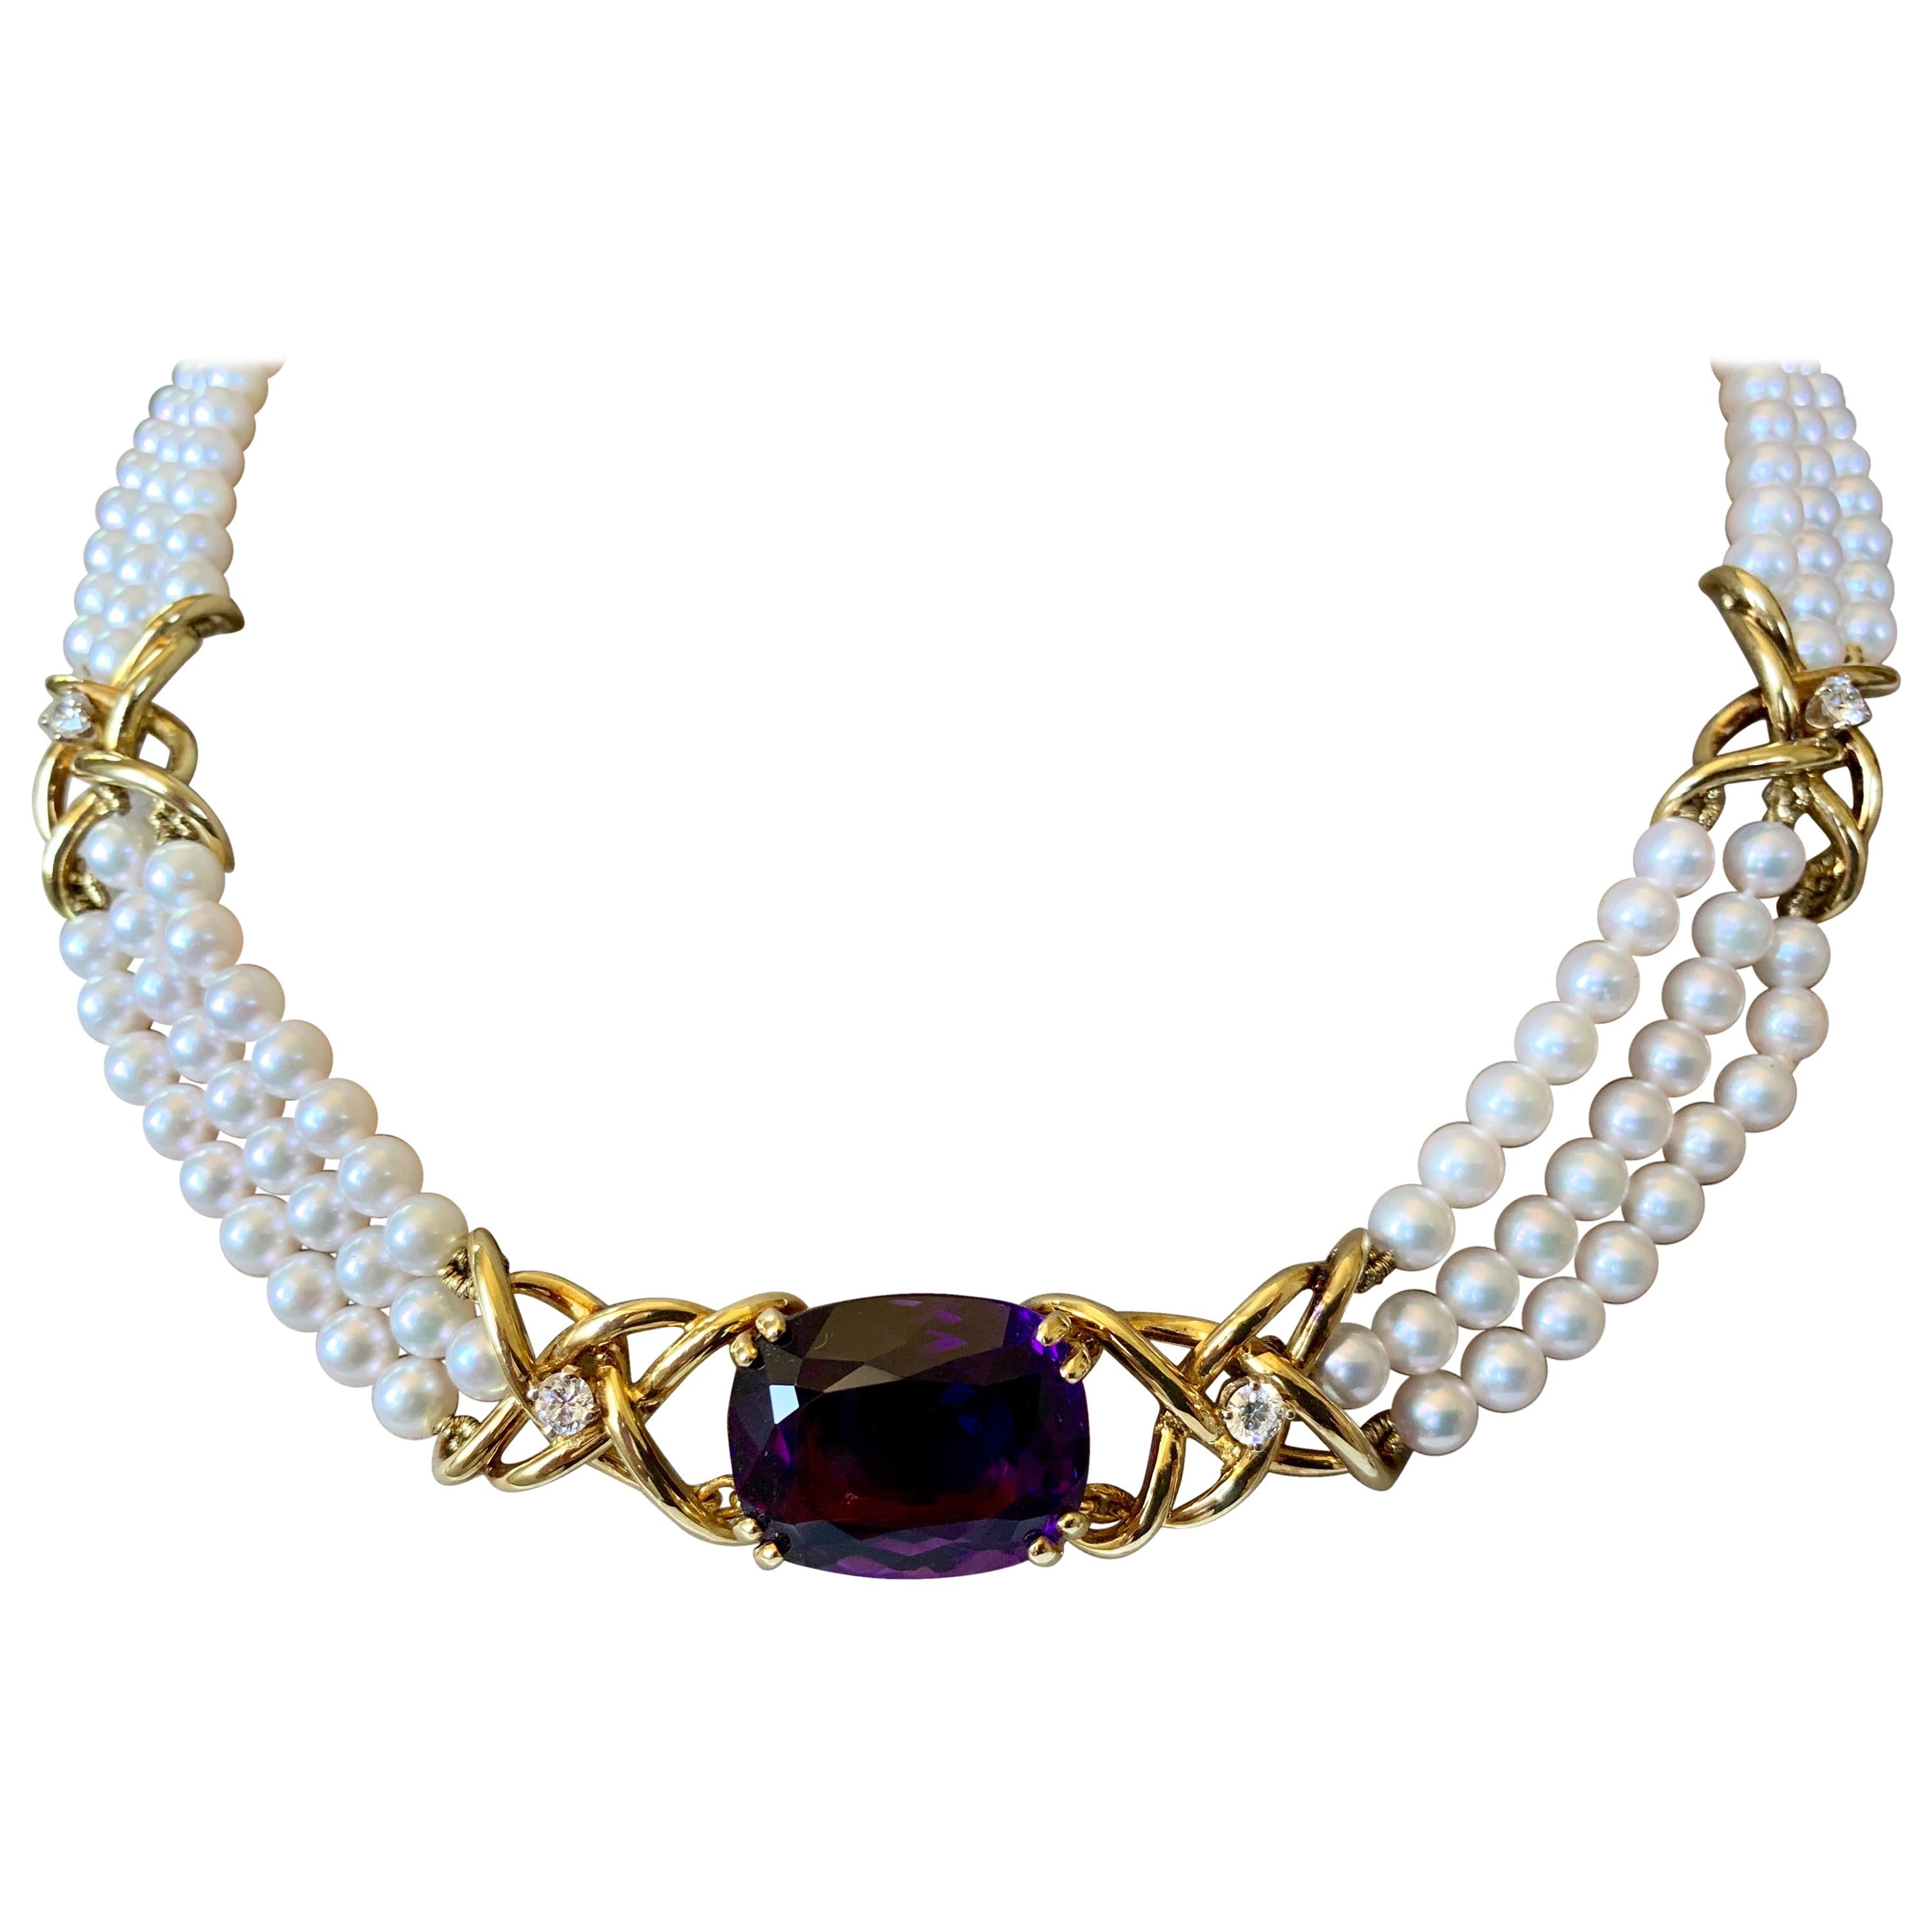 The 18 Karat yellow gold Tiffany necklace by Paloma Picasso is made of 3 strands of beautiful approximately 5 mm pearls accented with an oval Amethyst weighing ca. 20 ct  and 5 brilliant cut diamonds of ca. 0.60 ct. Length 43 cm. 